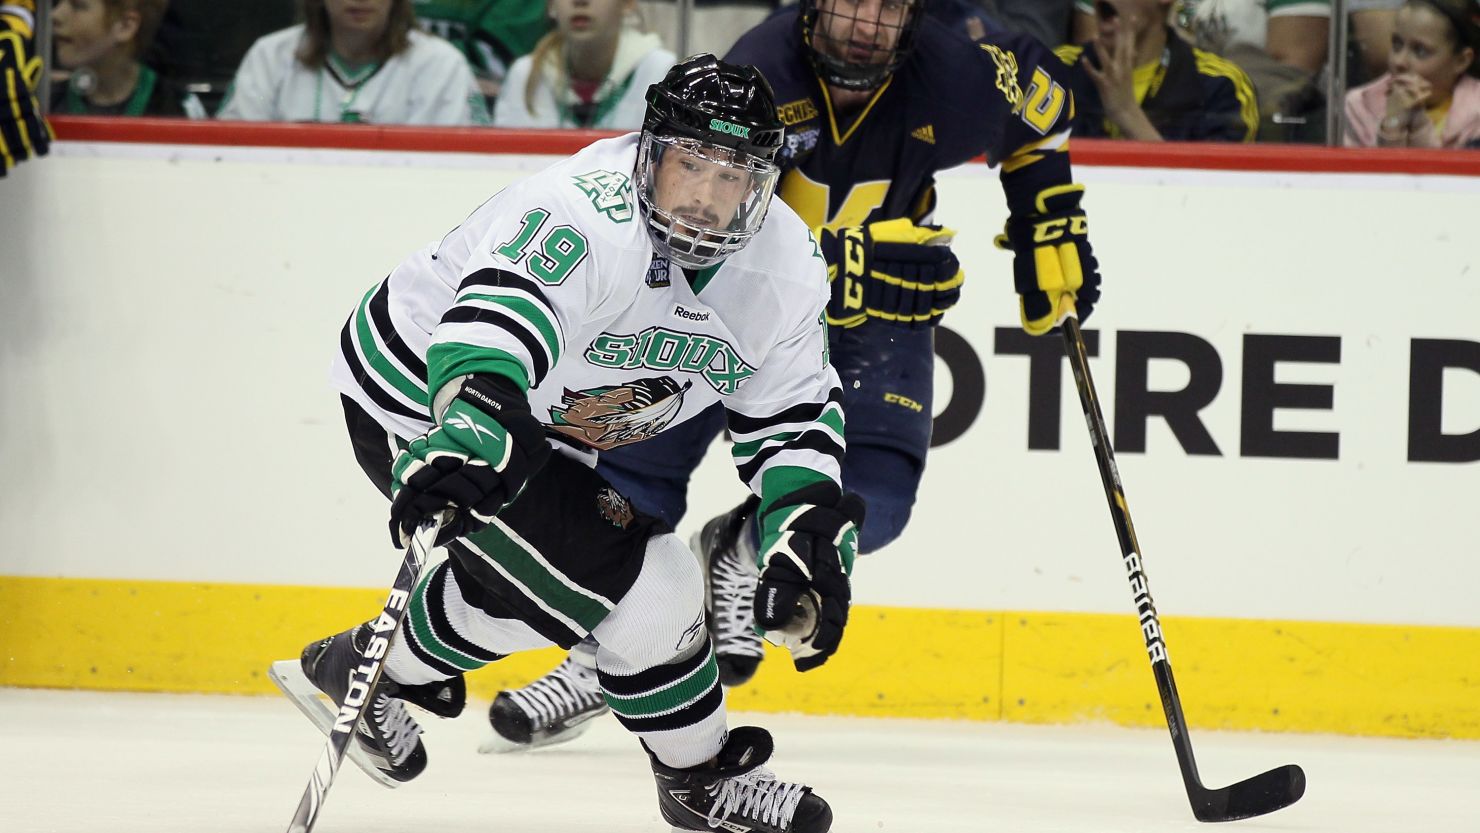 Evan Trupp of the North Dakota Fighting Sioux tries to keep the puck in a game against the Michigan Wolverines on April 7, 2011.